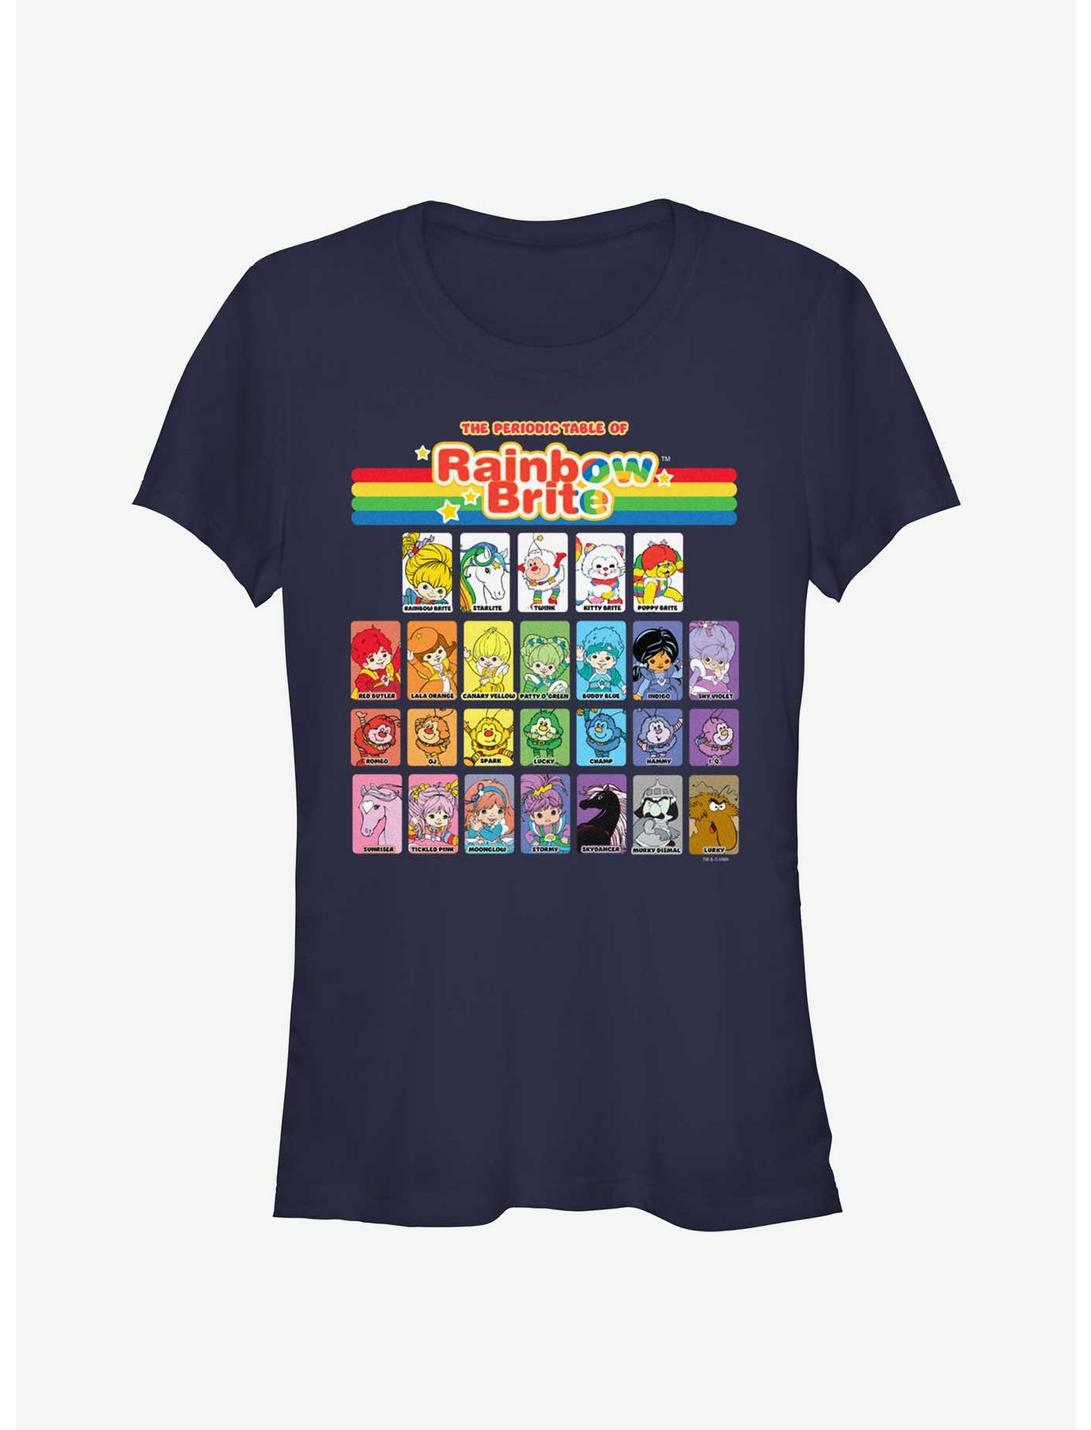 Rainbow Brite Table Of Color Girls T-Shirt, NAVY, hi-res